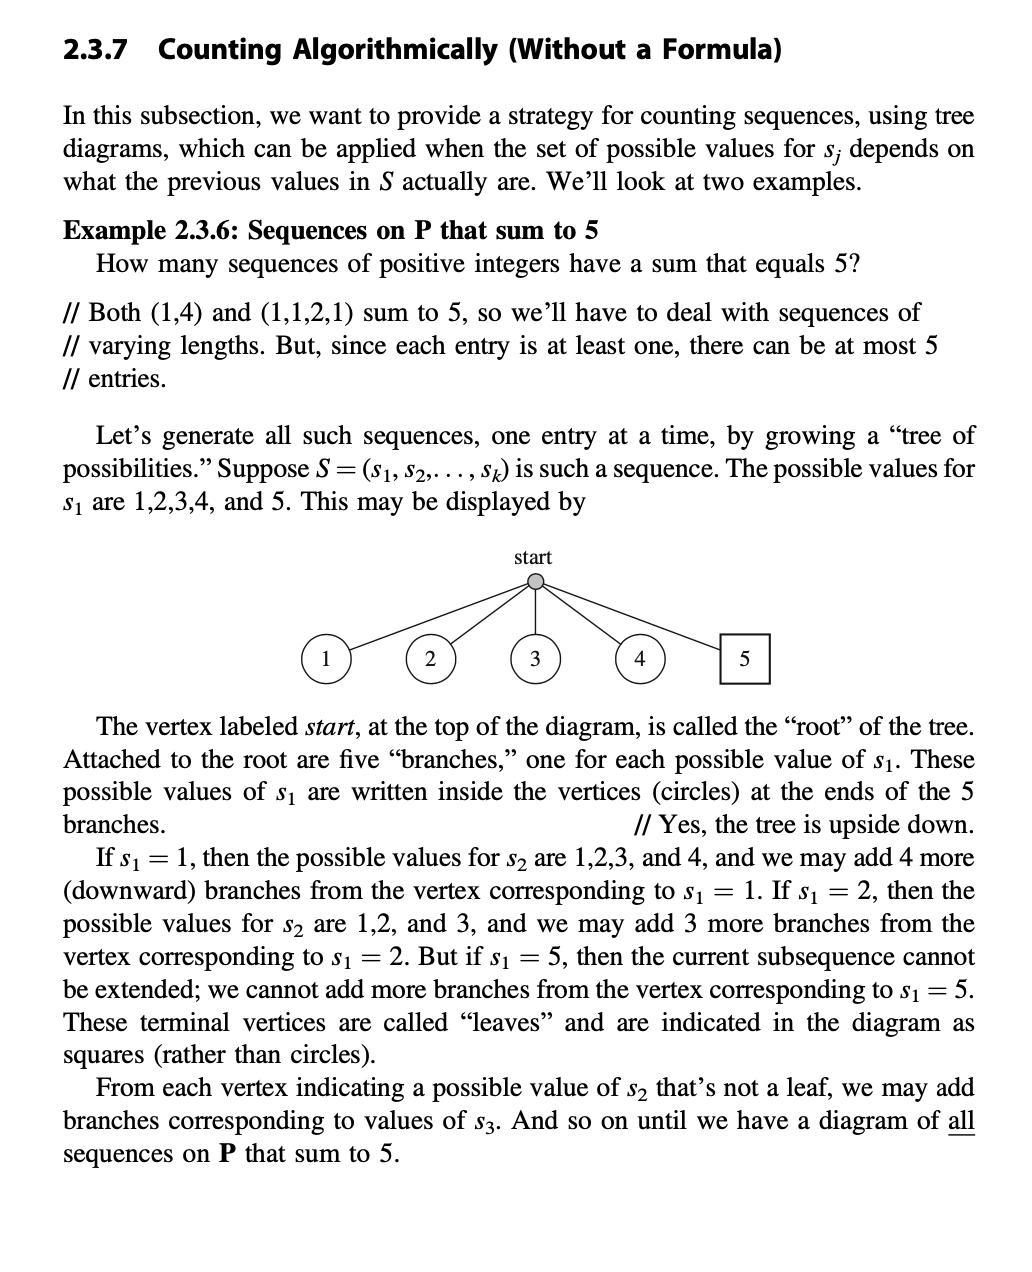 2.3.7 Counting Algorithmically (Without a Formula)
In this subsection, we want to provide a strategy for counting sequences, using tree
diagrams, which can be applied when the set of possible values for s; depends on
what the previous values in S actually are. We'll look at two examples.
Example 2.3.6: Sequences on P that sum to 5
How many sequences of positive integers have a sum that equals 5?
// Both (1,4) and (1,1,2,1) sum to 5, so we'll have to deal with sequences of
// varying lengths. But, since each entry is at least one, there can be at most 5
// entries.
Let's generate all such sequences, one entry at a time, by growing a "tree of
possibilities." Suppose S= (s1, S2,. .., Sk) is such a sequence. The possible values for
S1 are 1,2,3,4, and 5. This may be displayed by
start
3
4
5
The vertex labeled start, at the top of the diagram, is called the "root" of the tree.
Attached to the root are five “branches," one for each possible value of s1. These
possible values of s1 are written inside the vertices (circles) at the ends of the 5
branches.
// Yes, the tree is upside down.
If s1 = 1, then the possible values for s2 are 1,2,3, and 4, and we may add 4 more
(downward) branches from the vertex corresponding to s1 = 1. If s1 = 2, then the
possible values for s2 are 1,2, and 3, and we may add 3 more branches from the
vertex corresponding to s1 = 2. But if s1 = 5, then the current subsequence cannot
be extended; we cannot add more branches from the vertex corresponding to s1 = 5.
These terminal vertices are called "leaves" and are indicated in the diagram as
squares (rather than circles).
From each vertex indicating a possible value of s2 that's not a leaf, we may add
branches corresponding to values of s3. And so on until we have a diagram of all
sequences on P that sum to 5.
